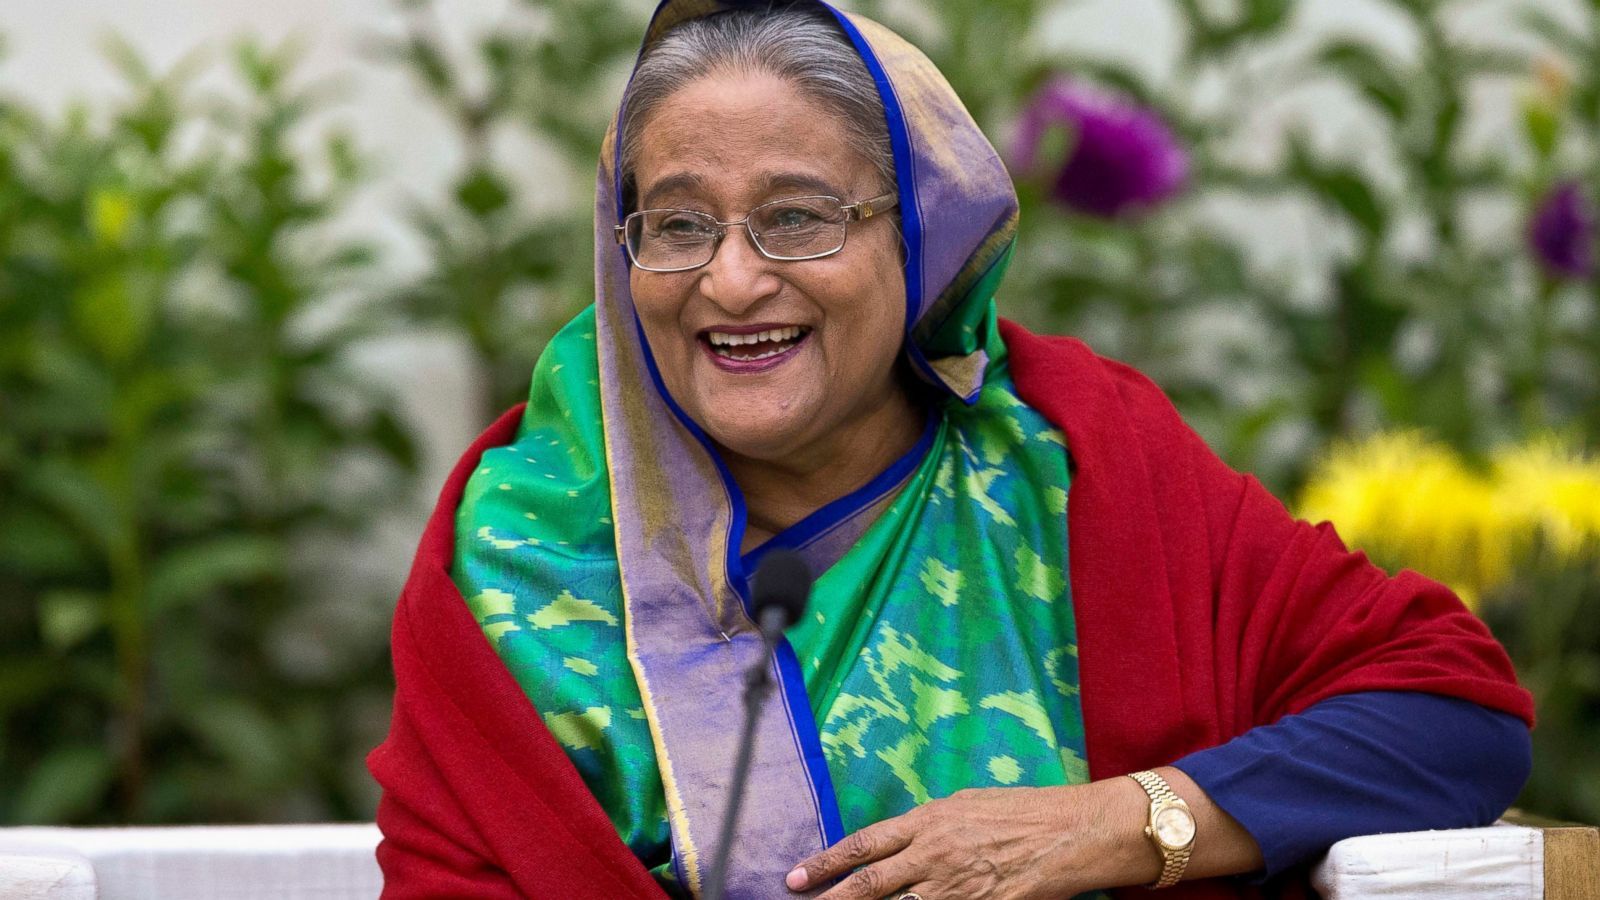 Global support lets Bangladesh PM withstand election worries